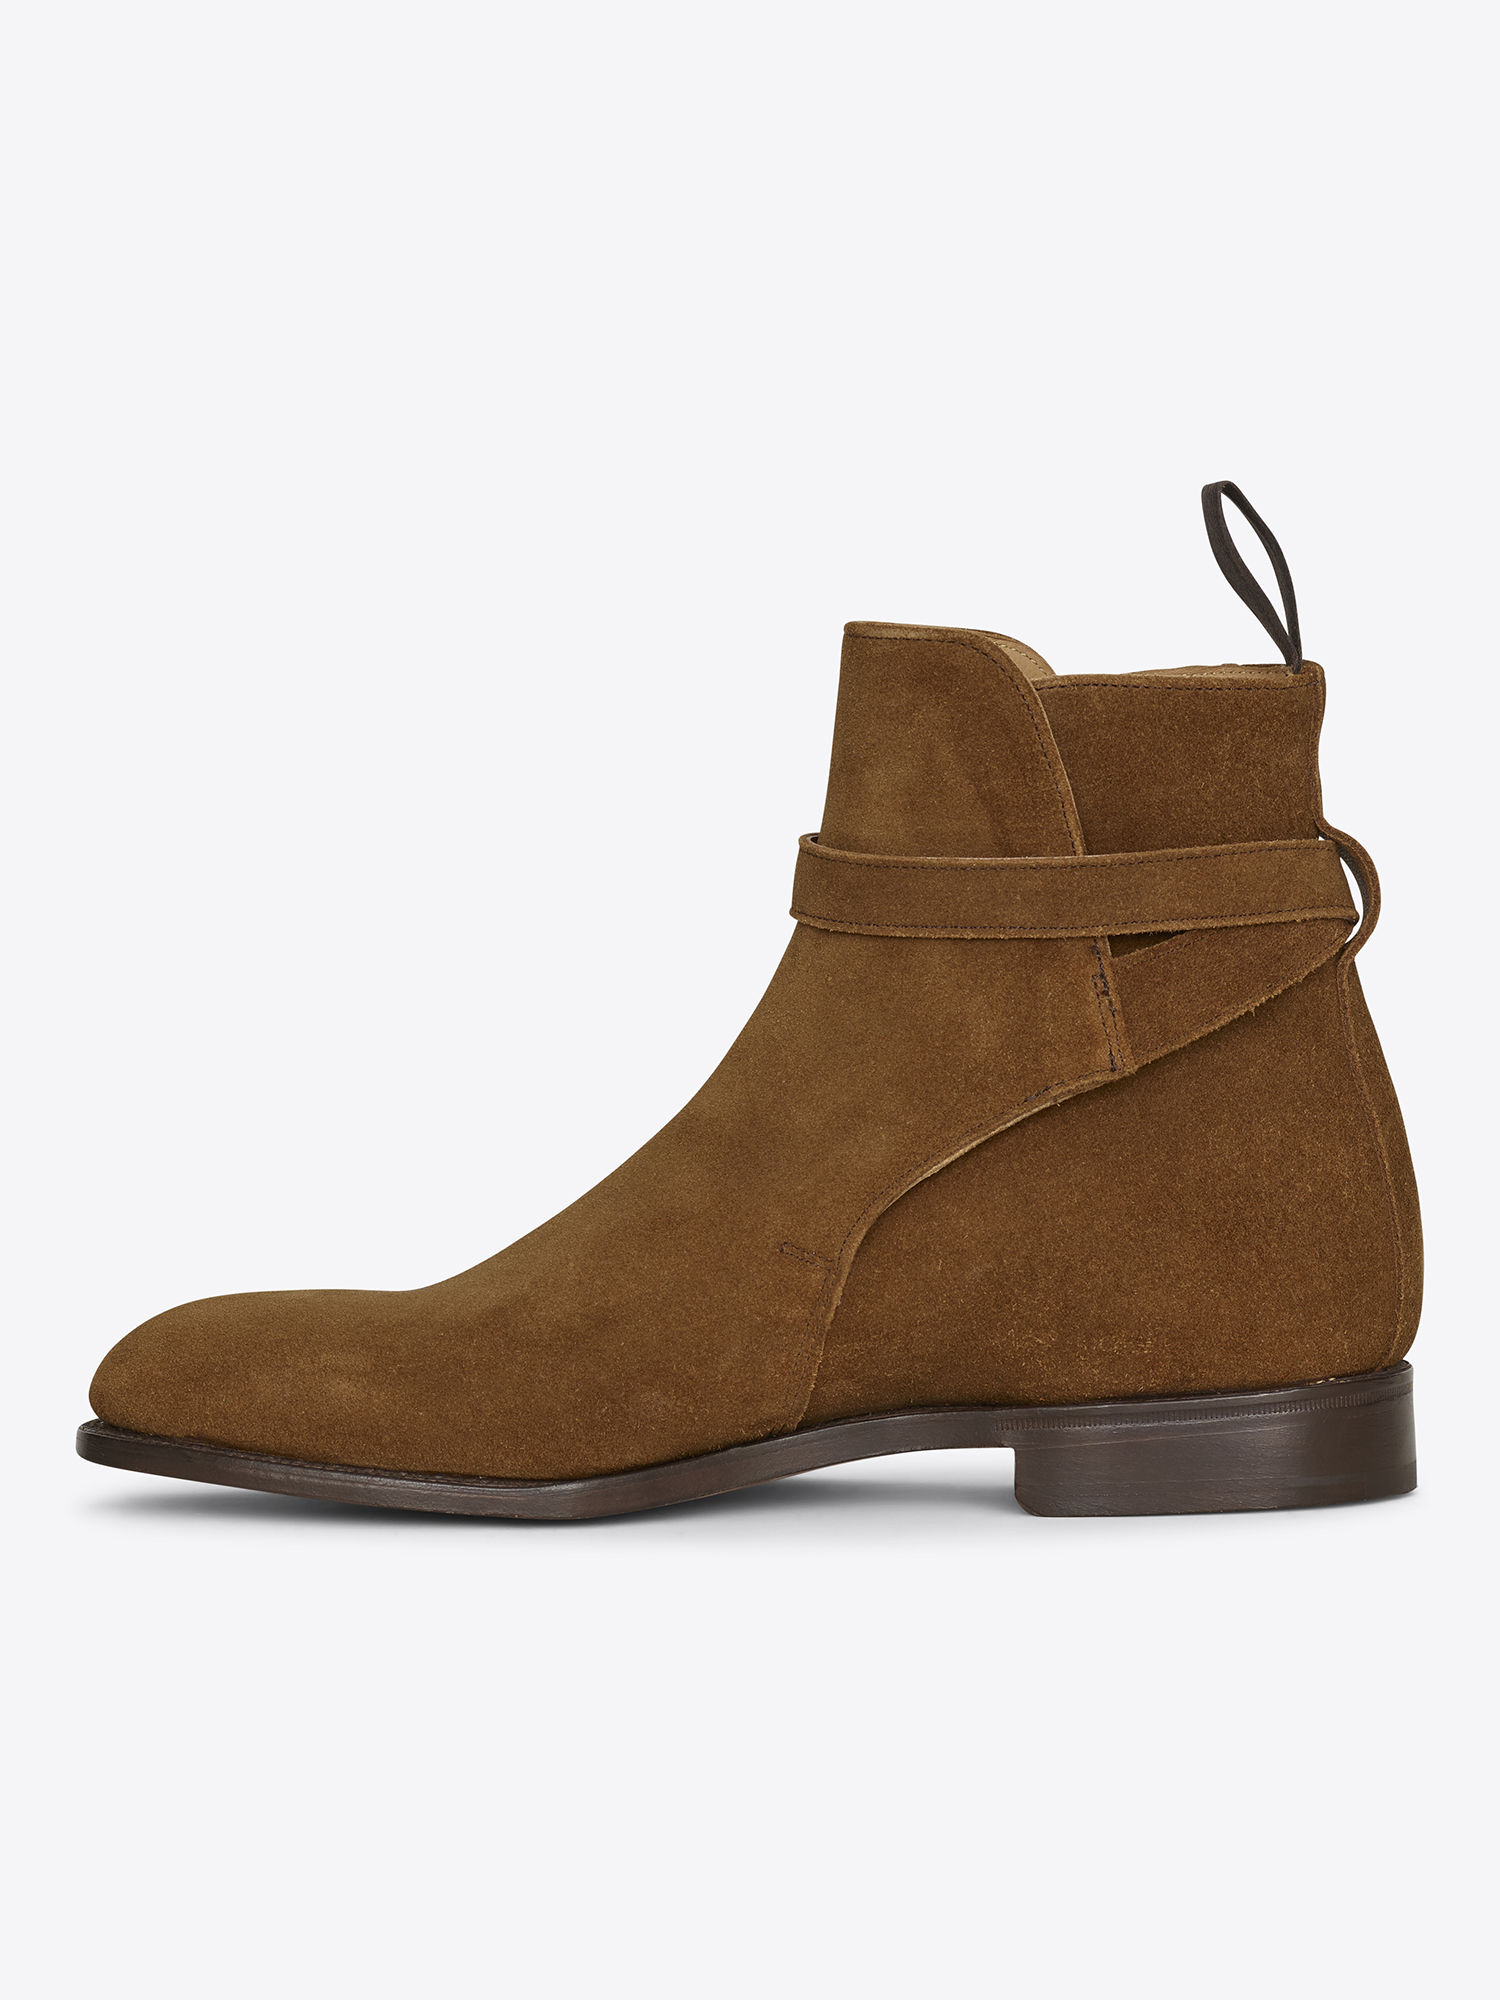 Jodhpur ankle boots with classic heel in nut brown suede